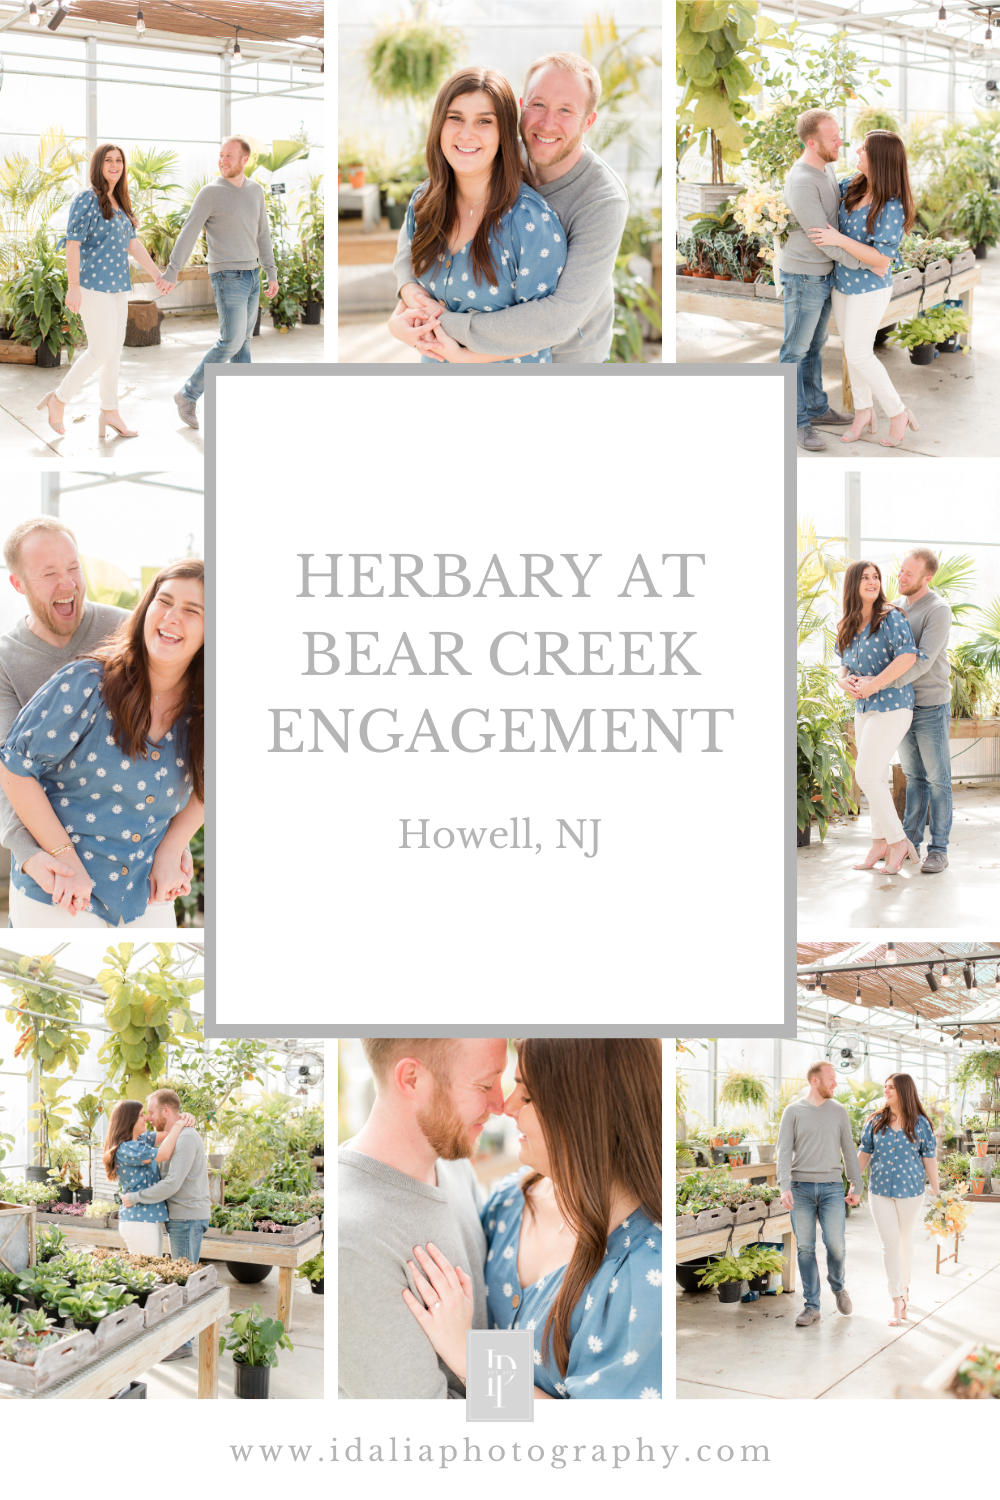 Herbary at Bear Creek engagement session in Monmouth NJ greenhouse